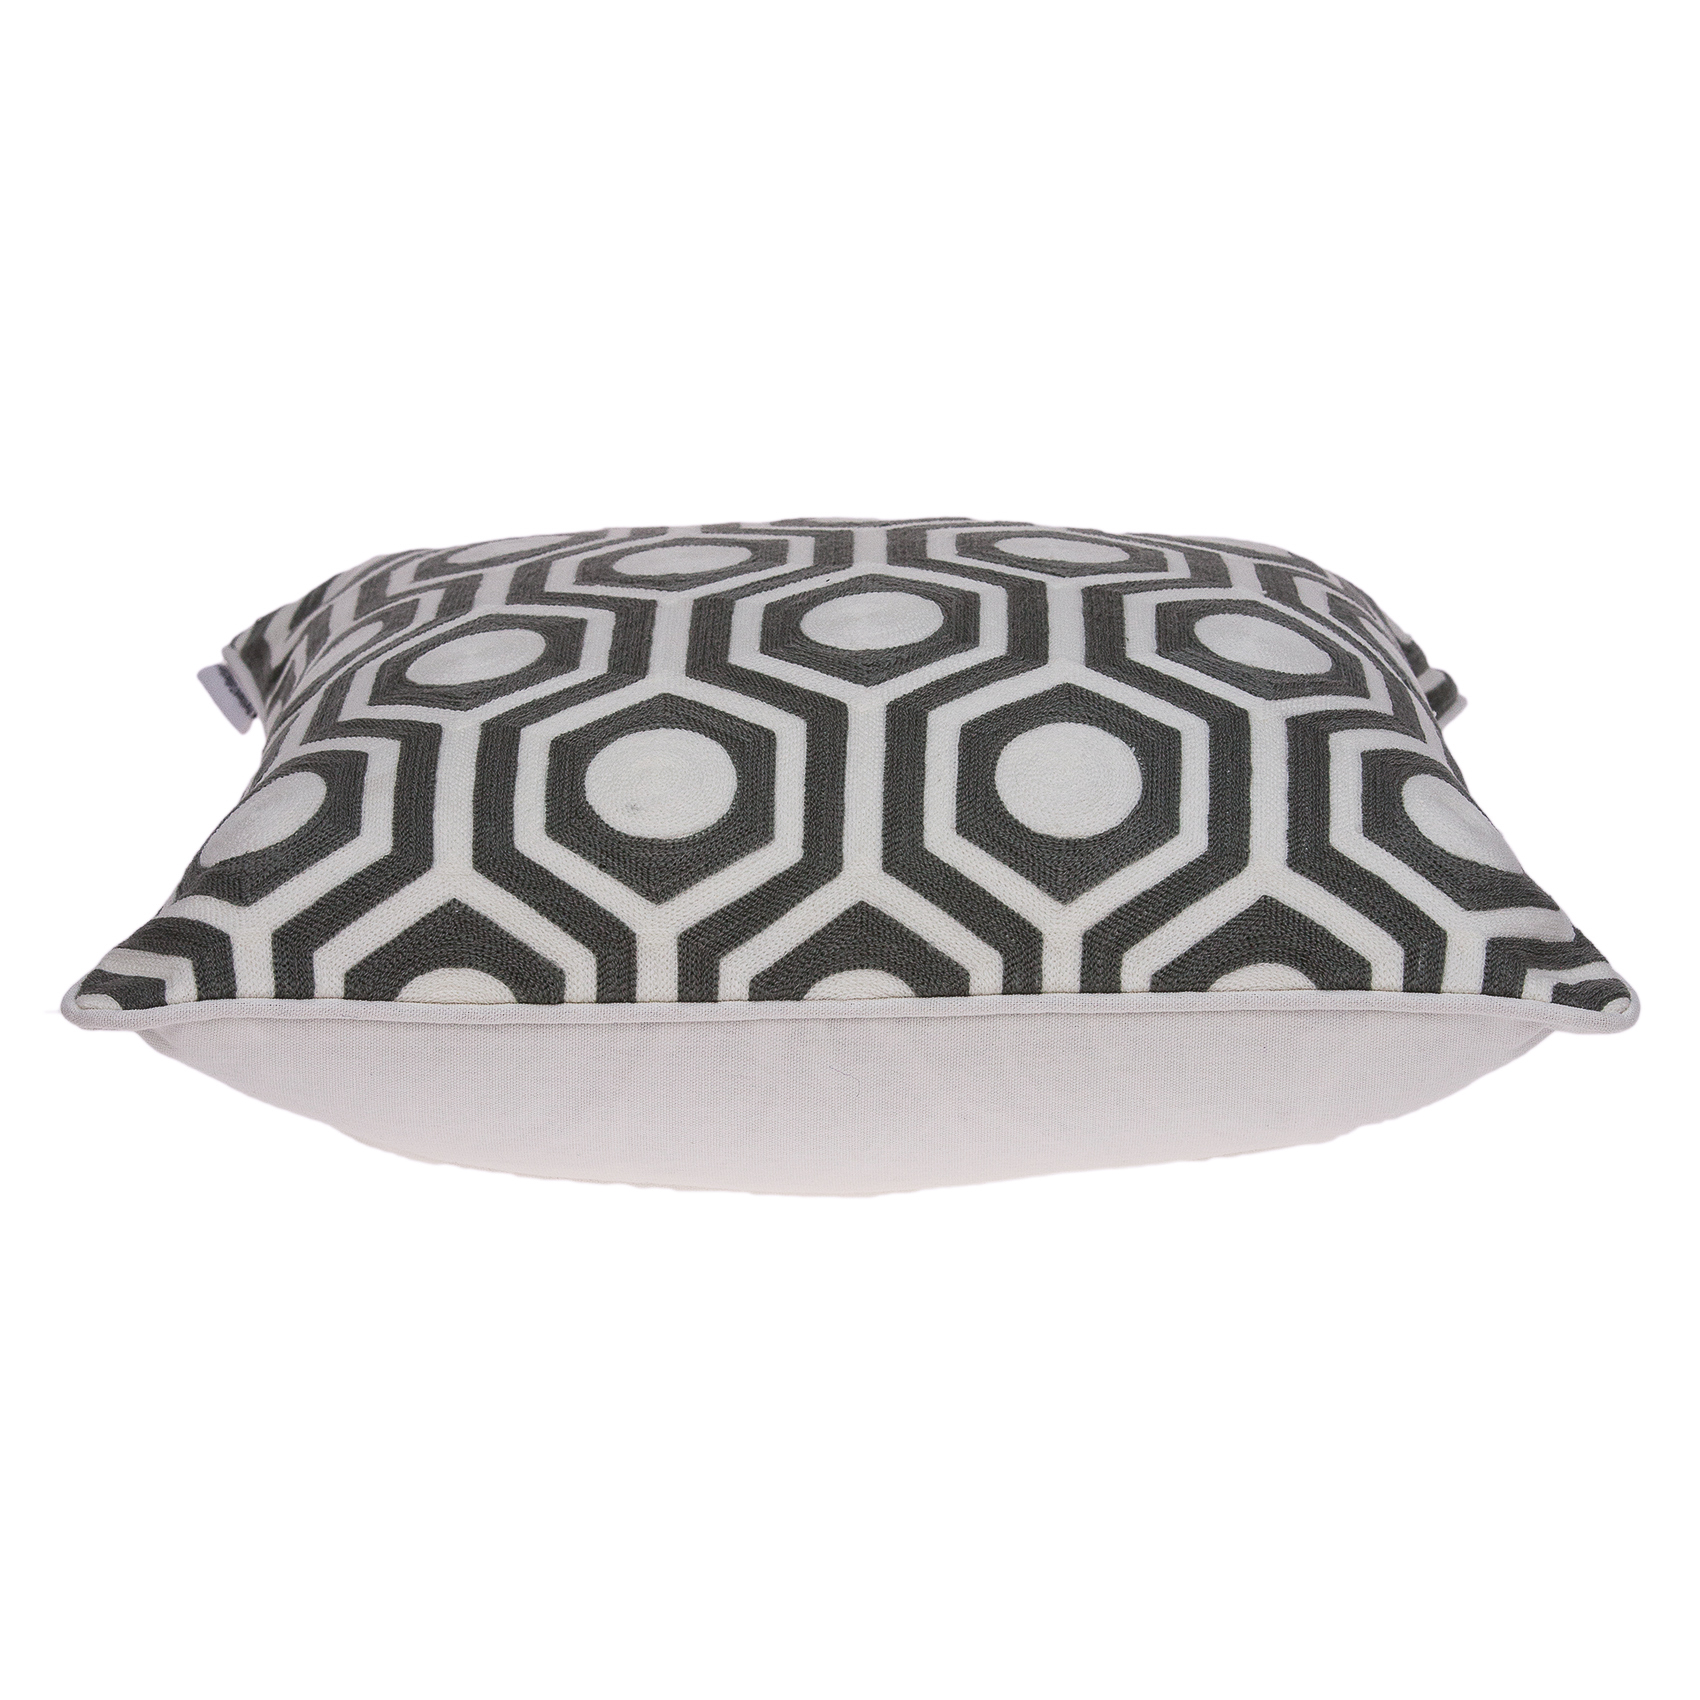 20" x 0.5" x 20" Traditional Gray and White Pillow Cover